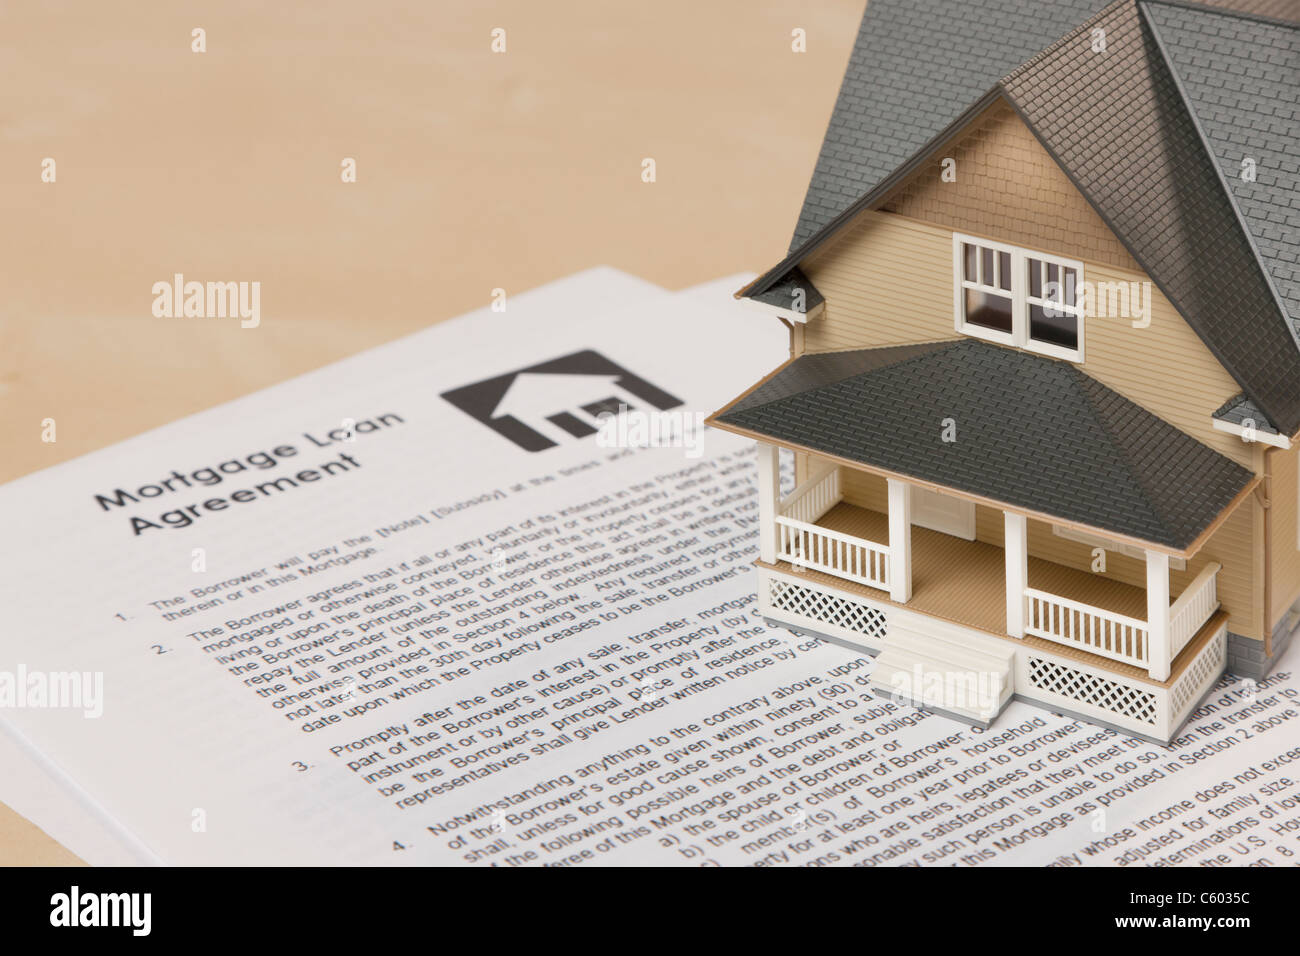 Model house on mortgage document Stock Photo